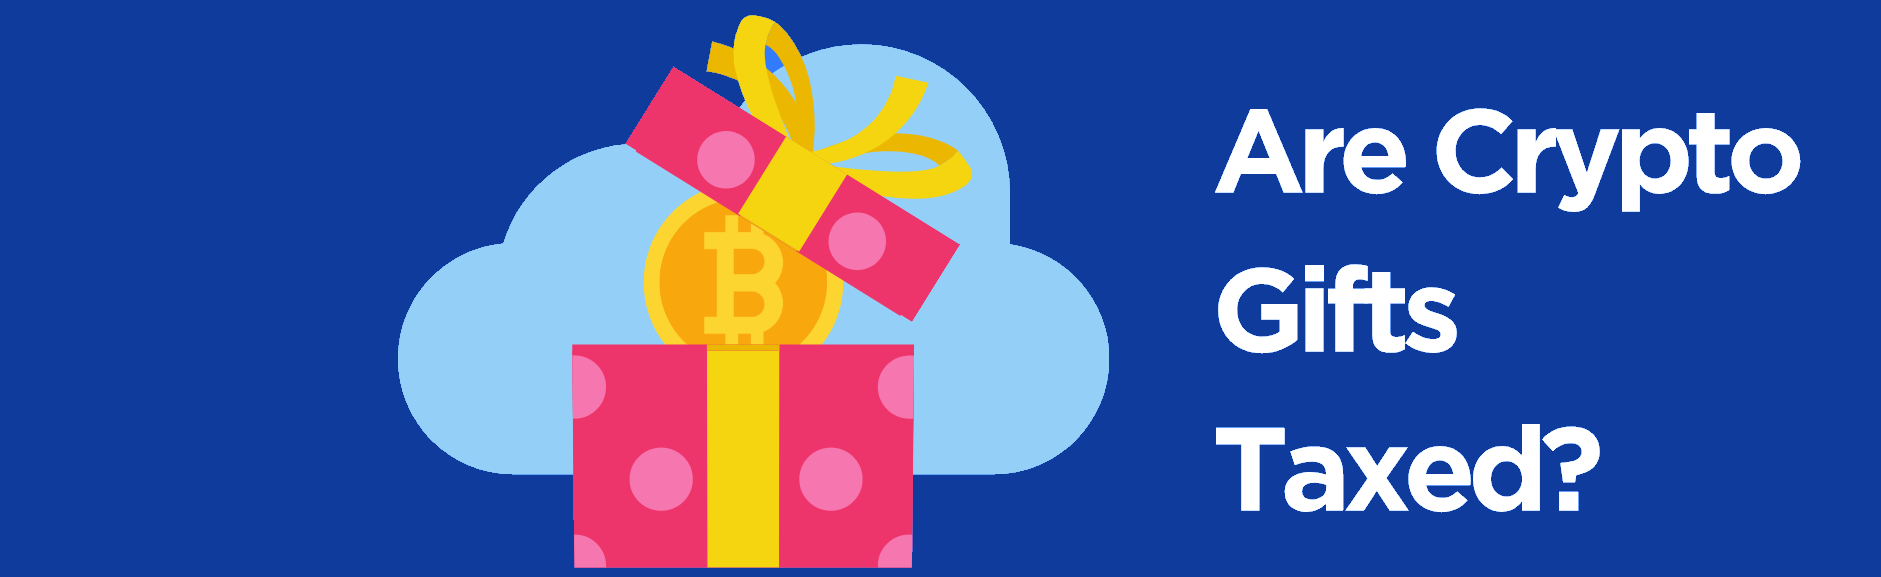 Are crypto currency gifts taxed?